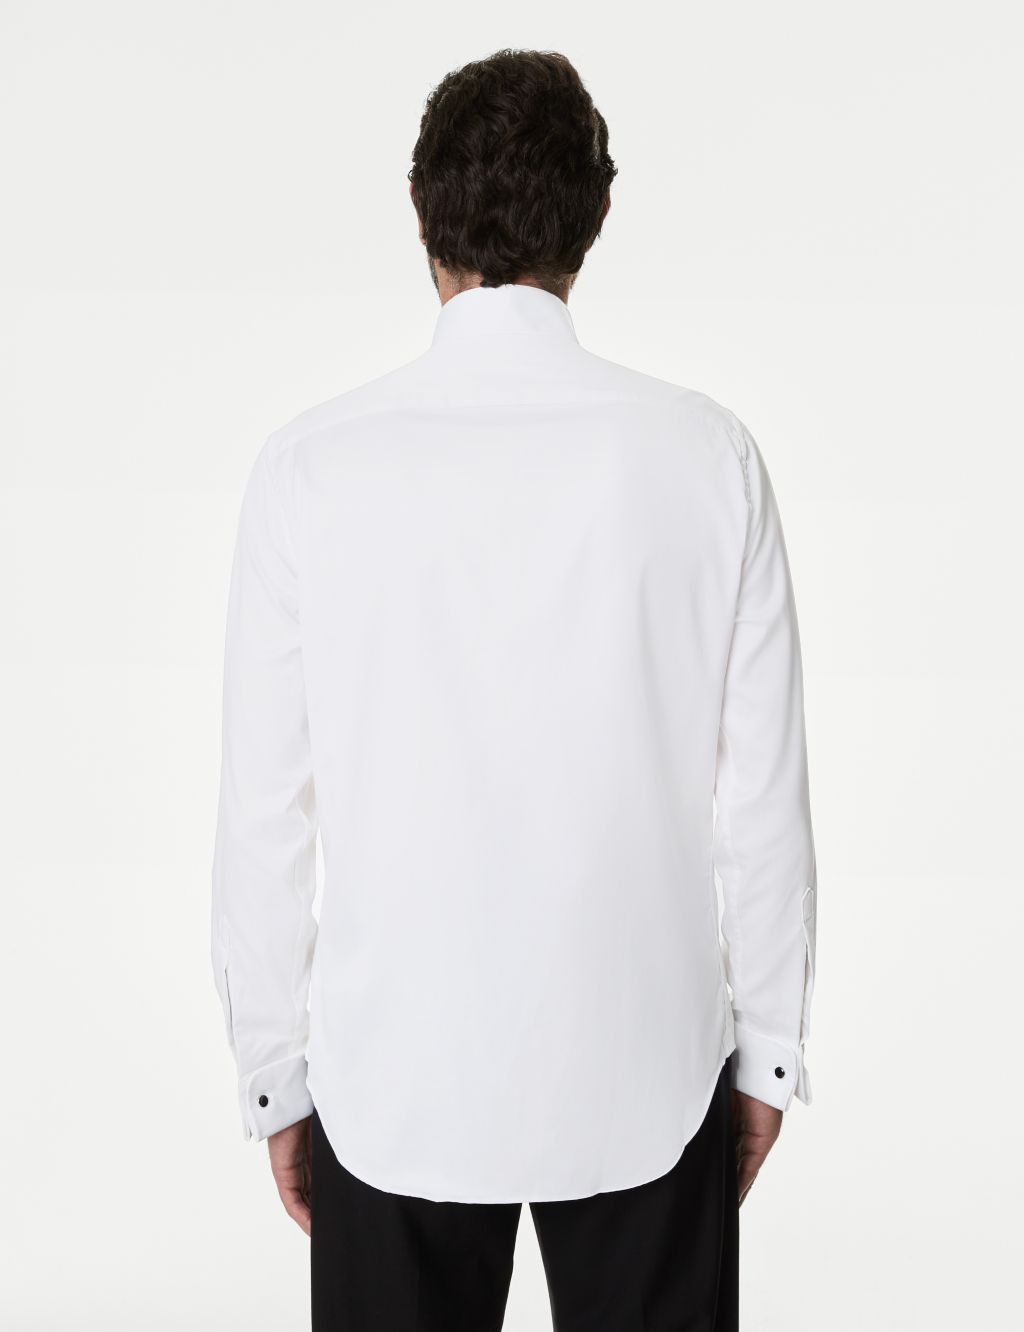 Tailored Fit Luxury Cotton Double Cuff Dress Shirt | M&S SARTORIAL | M&S